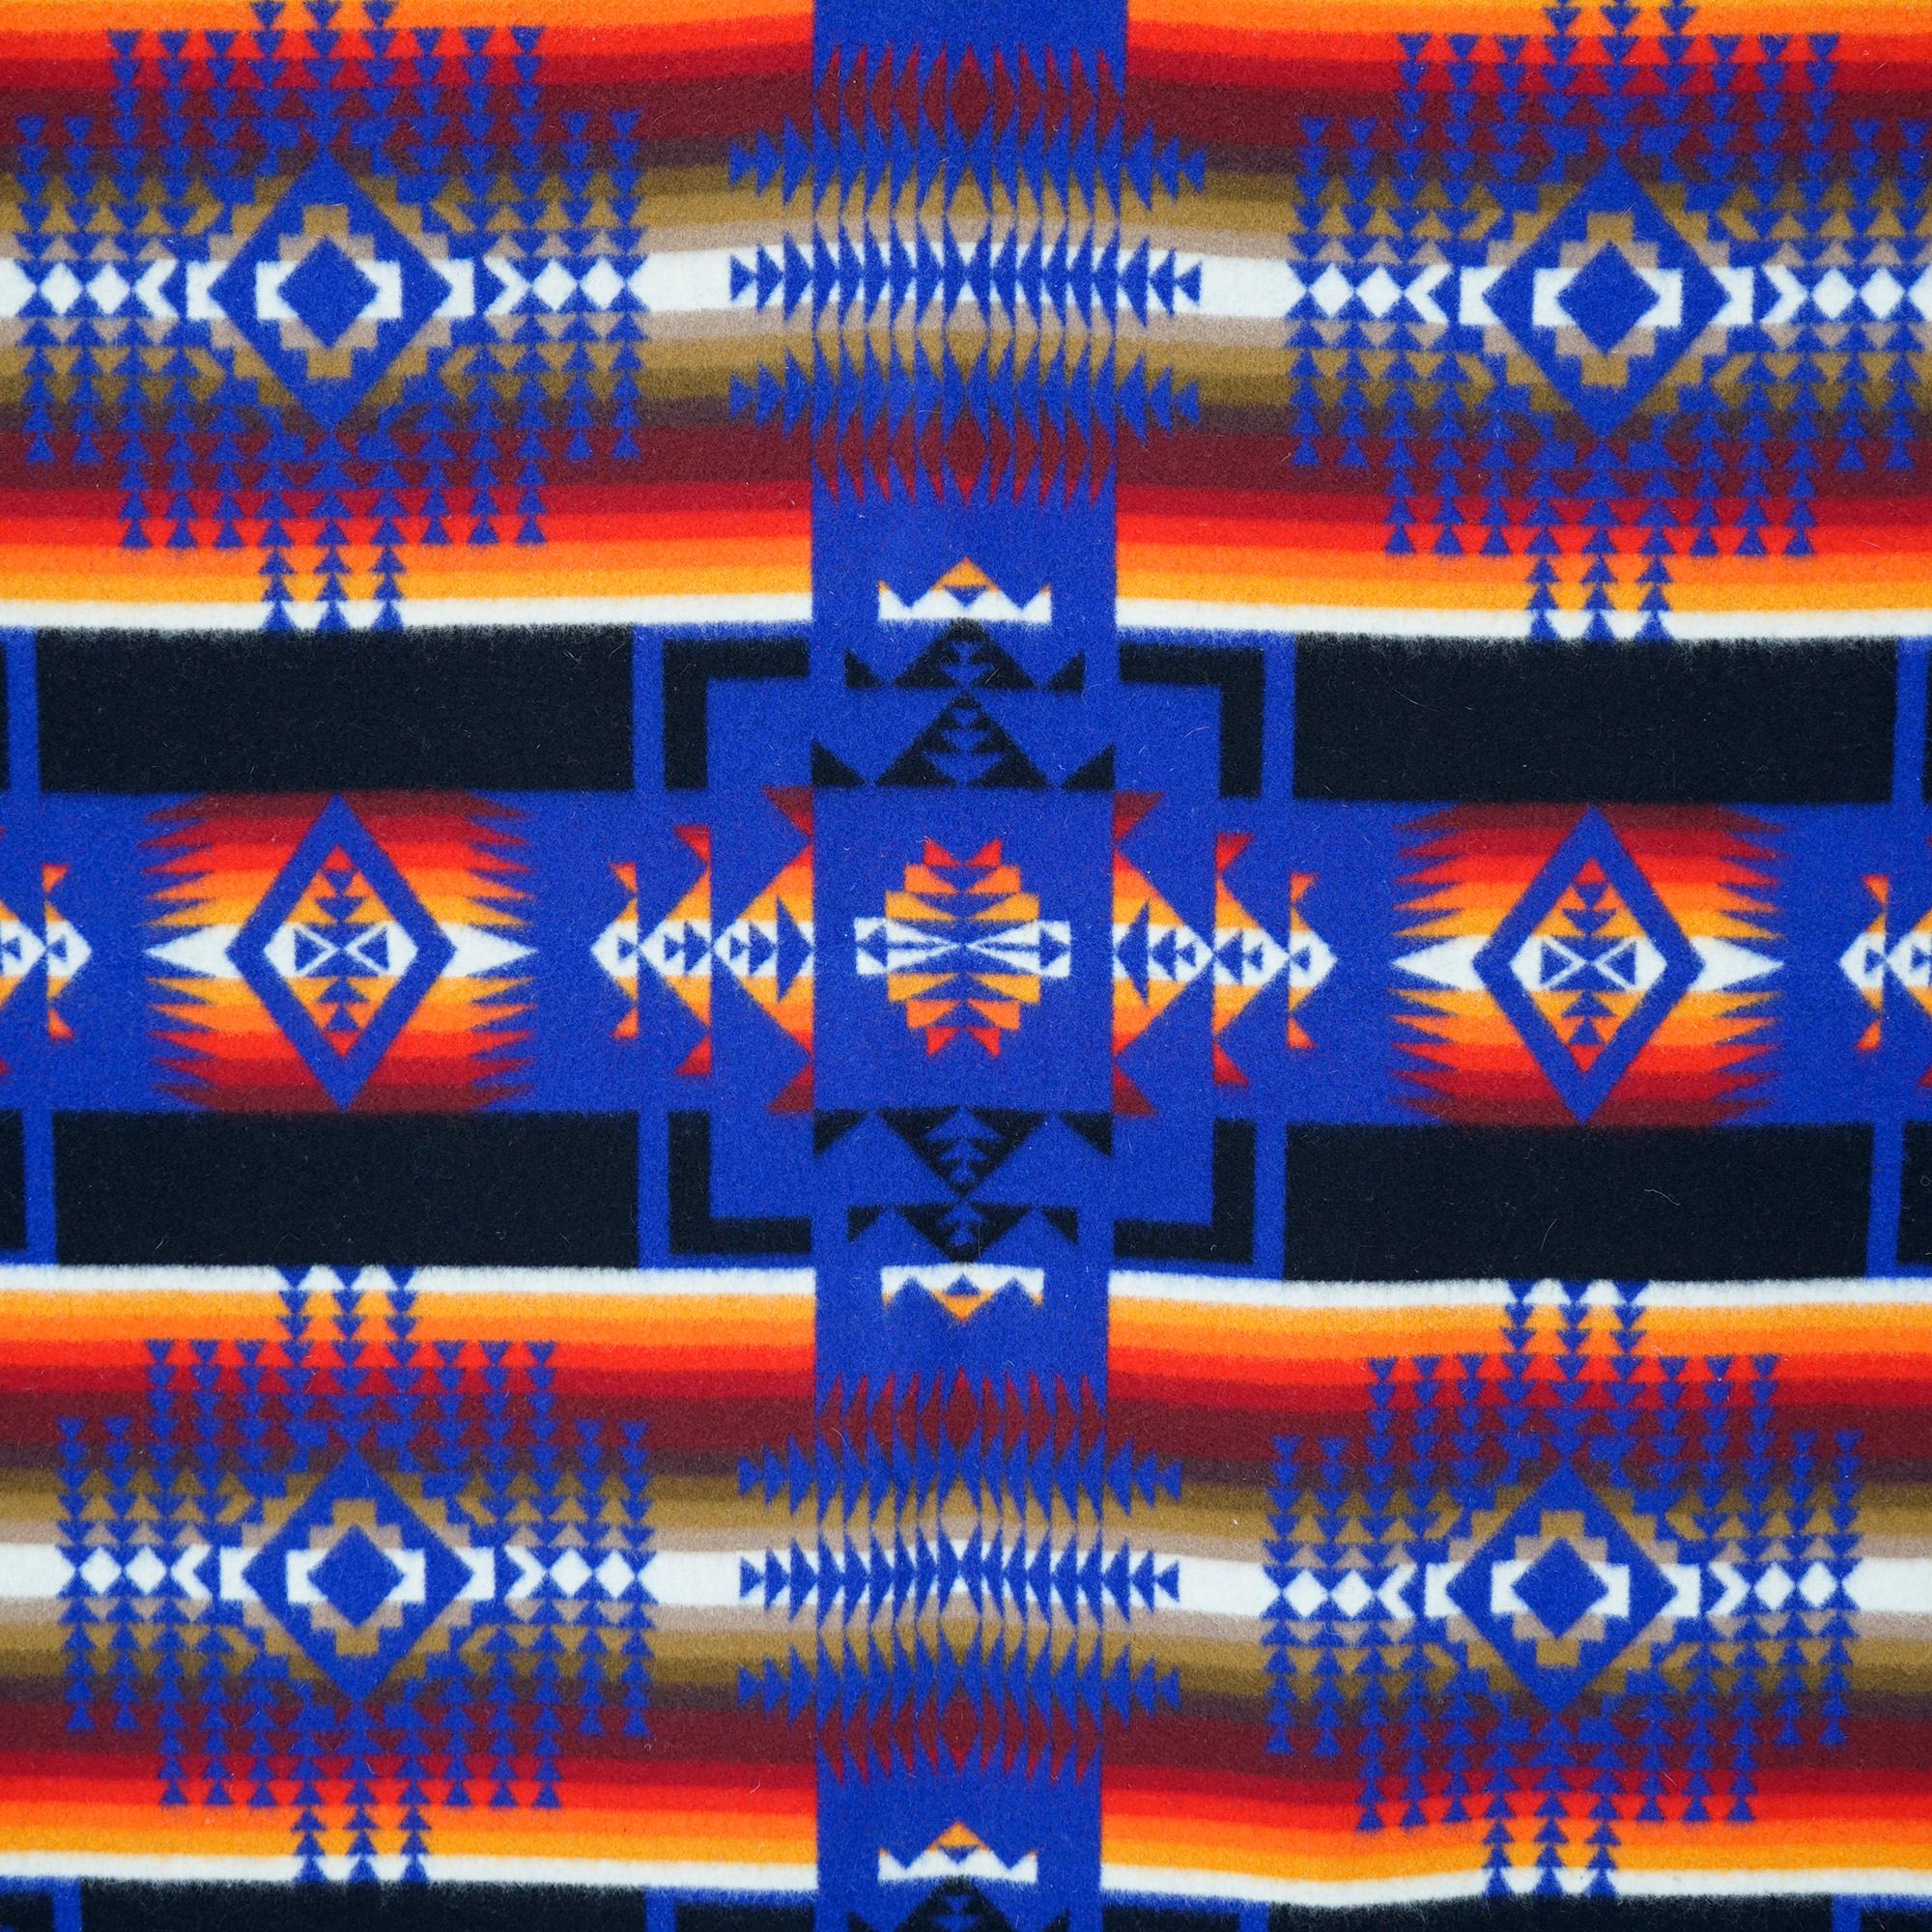 An Arts & Crafts style blanket by Pendleton Woolen Mills in the Chief Joseph design in sapphire offers wool construction with Southwestern American Indian design, 20th century

Measures- 74''H x 62.75''W x .5''D.